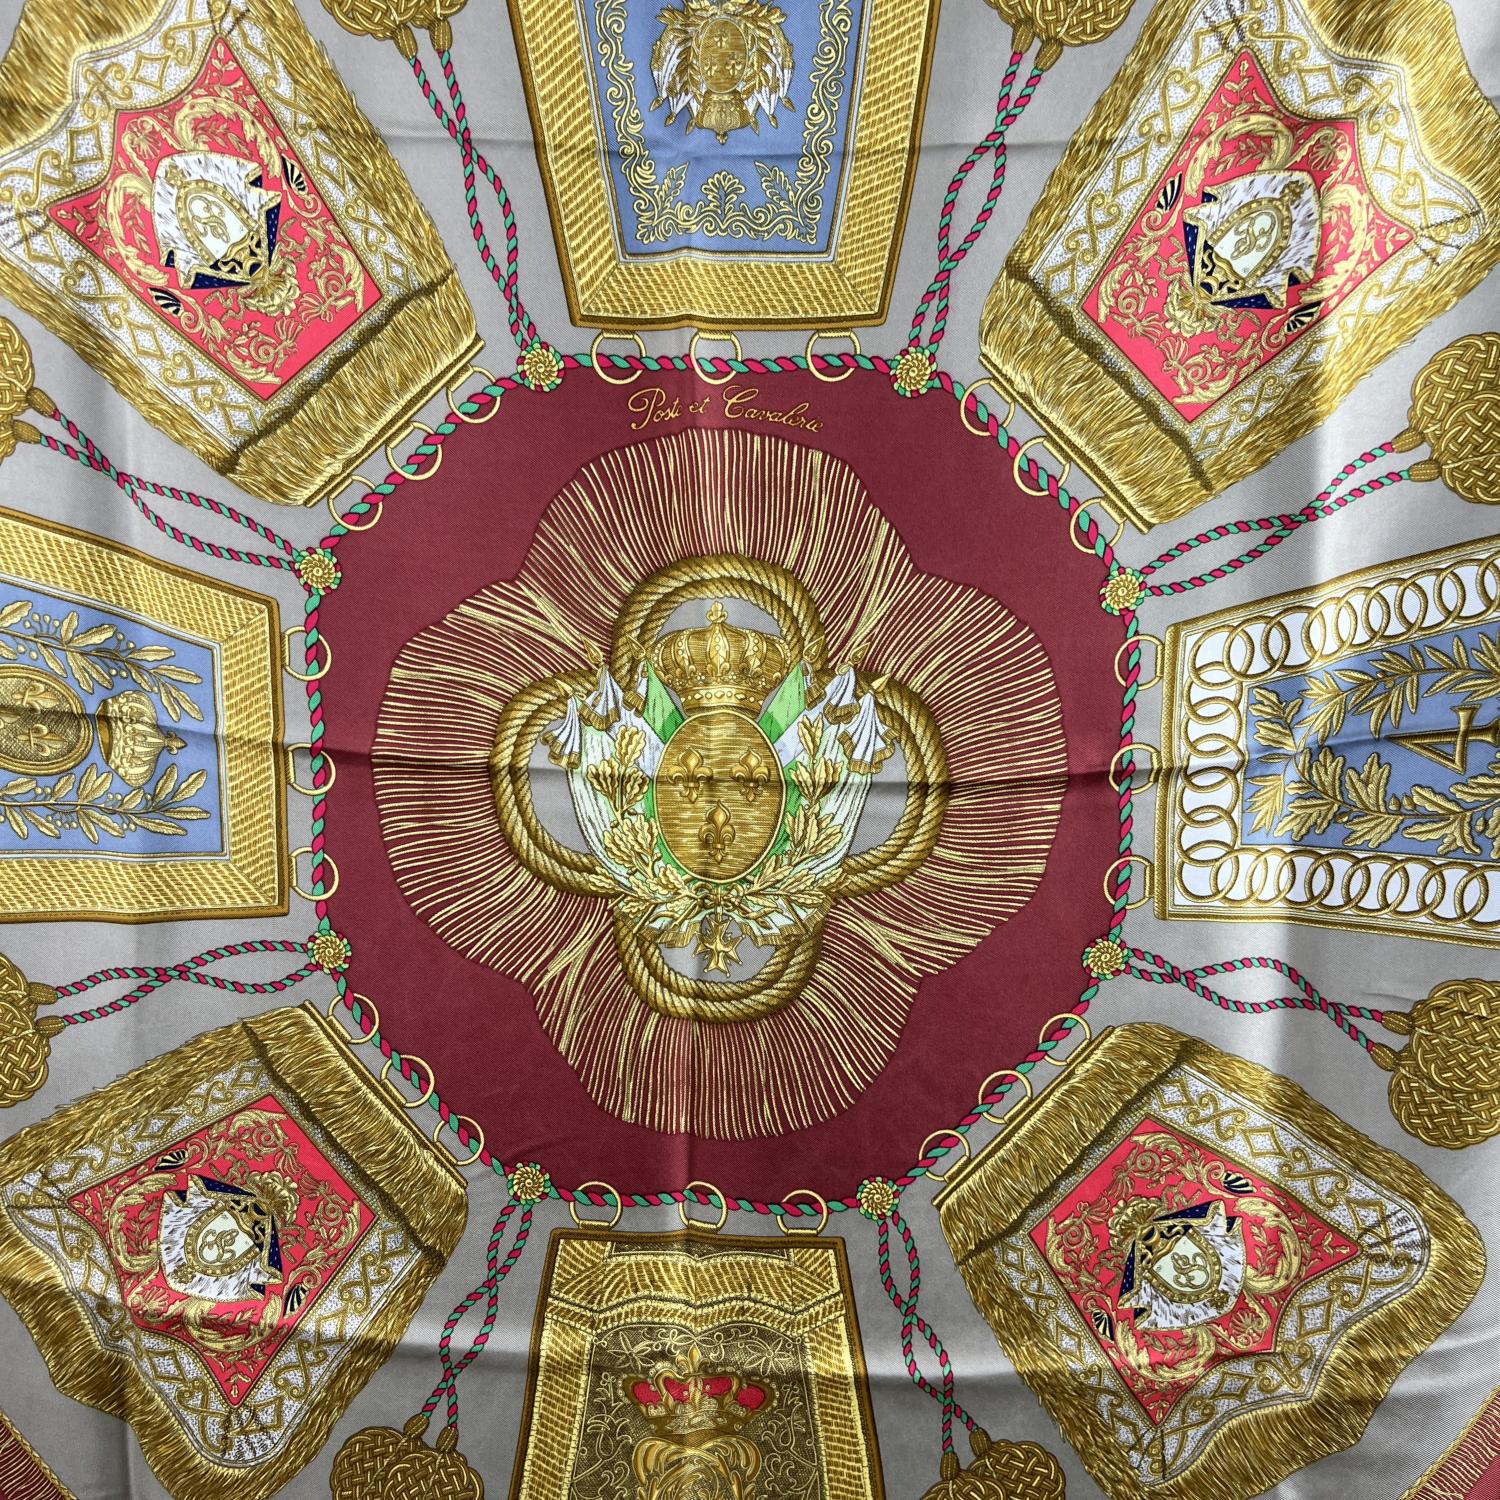 Vintage Hermes 'POSTE ET CAVALERIE' silk scarf by Johachim Metz, originally issued in 1987. Hand rolled edges. Made in France. Composition: 100%% silk. Measurements: 35 x 35 inches - 88,9x 88,9 cm. Logos / Tags: 'Hermes-Paris' printed in the